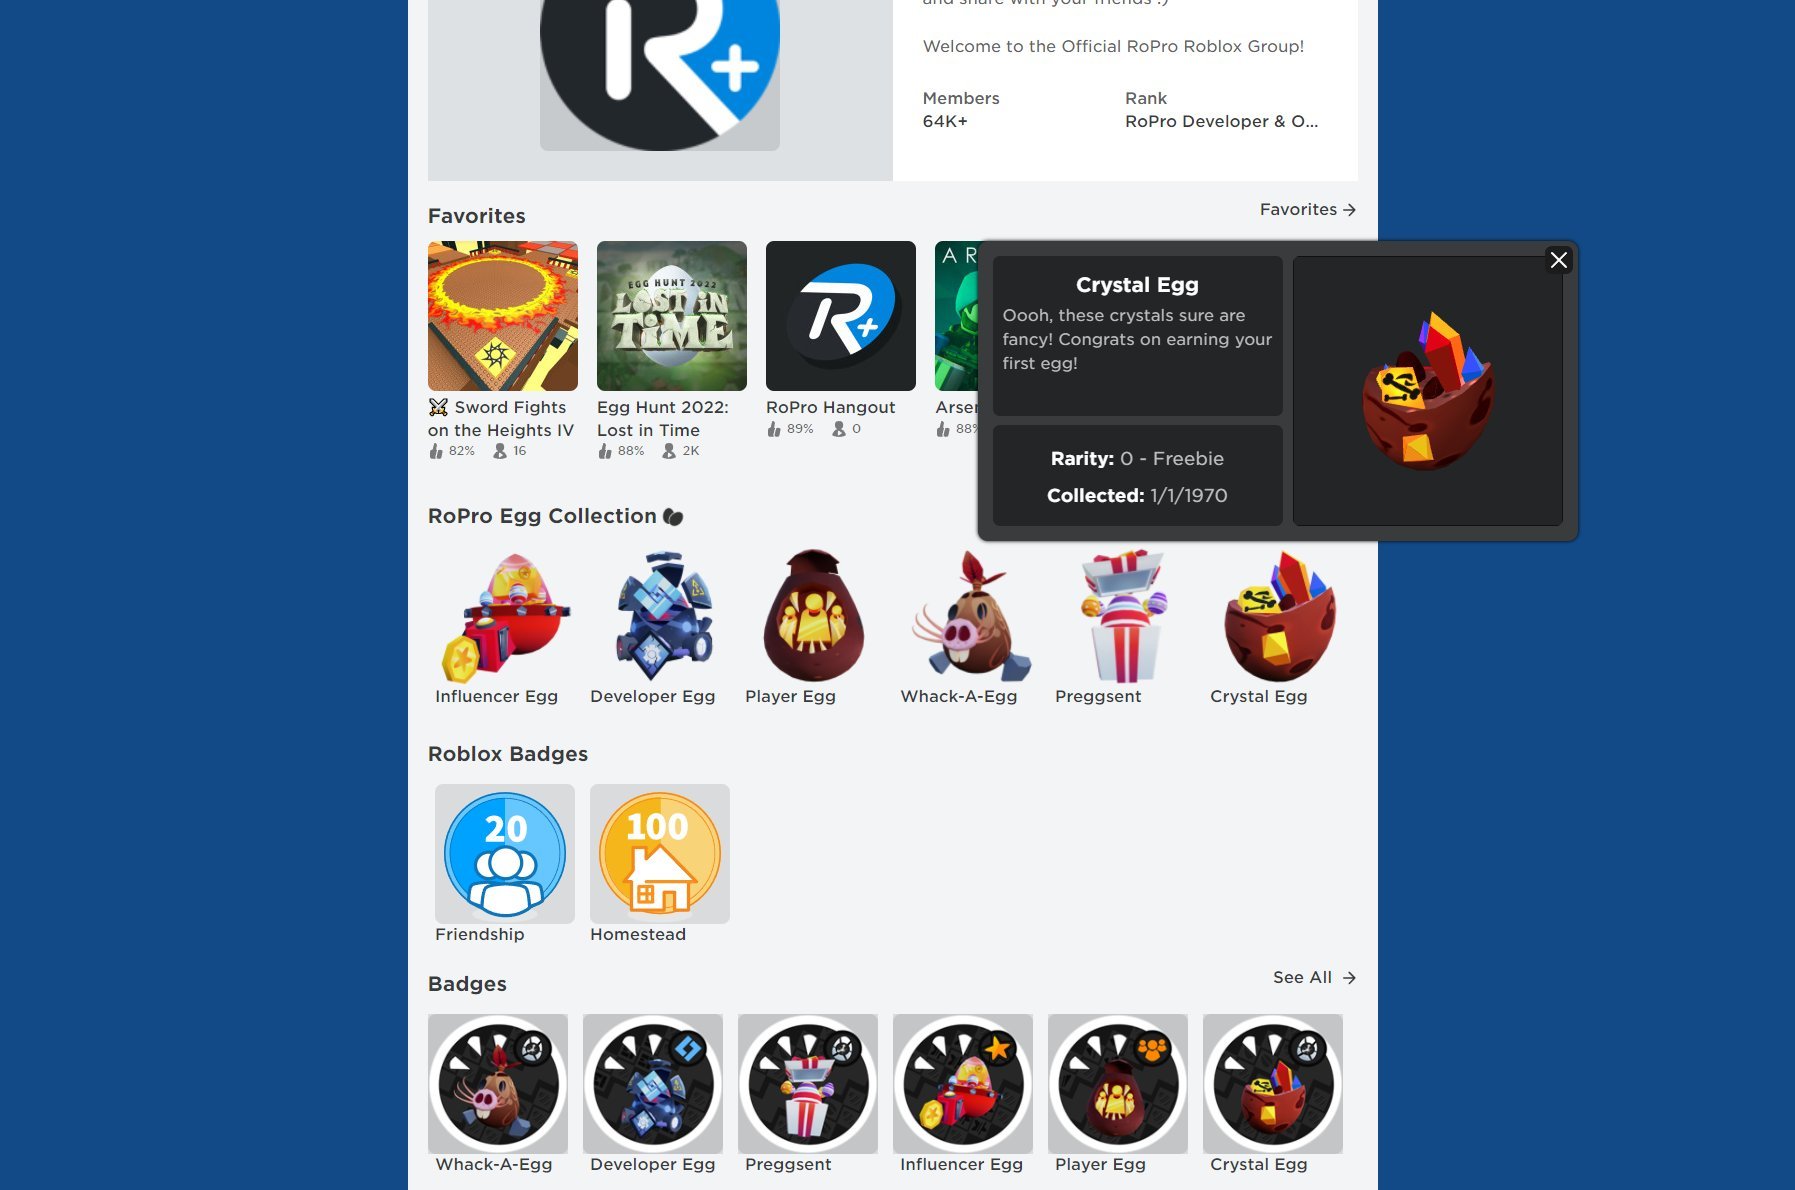 Roblox Leakers  News & Leaks on X: ROBLOX NEWS Roblox Chrome Extension  'RoPro' have collabed with 'Egg Hunt 2022: Lost in Time' with a new Egg  Collection update! Collect Eggs in